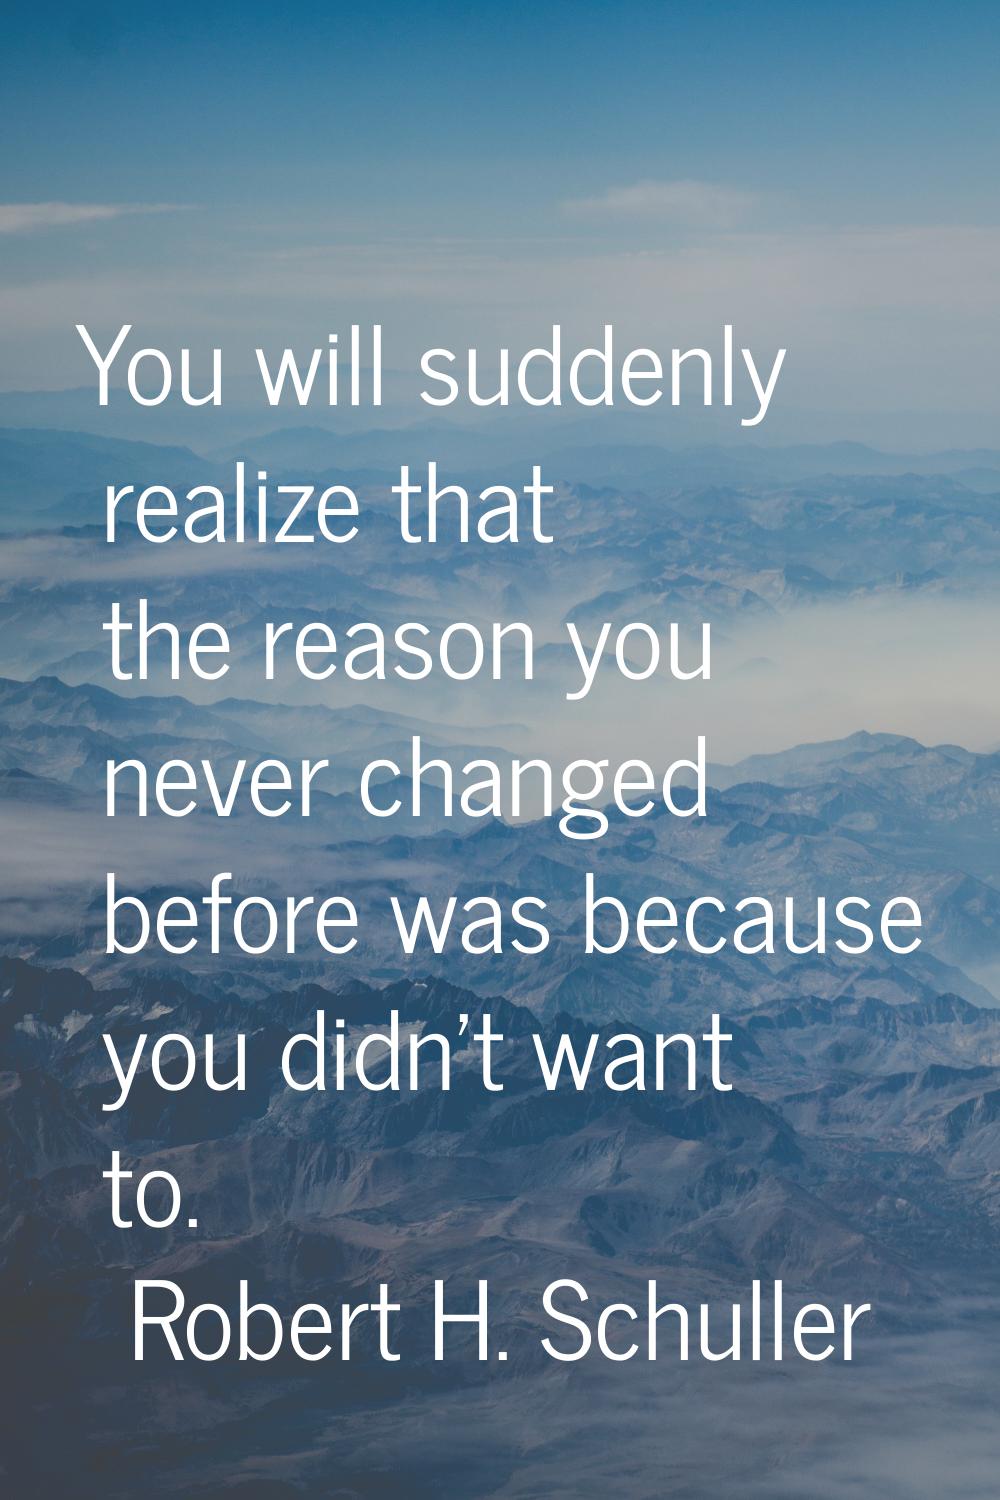 You will suddenly realize that the reason you never changed before was because you didn't want to.